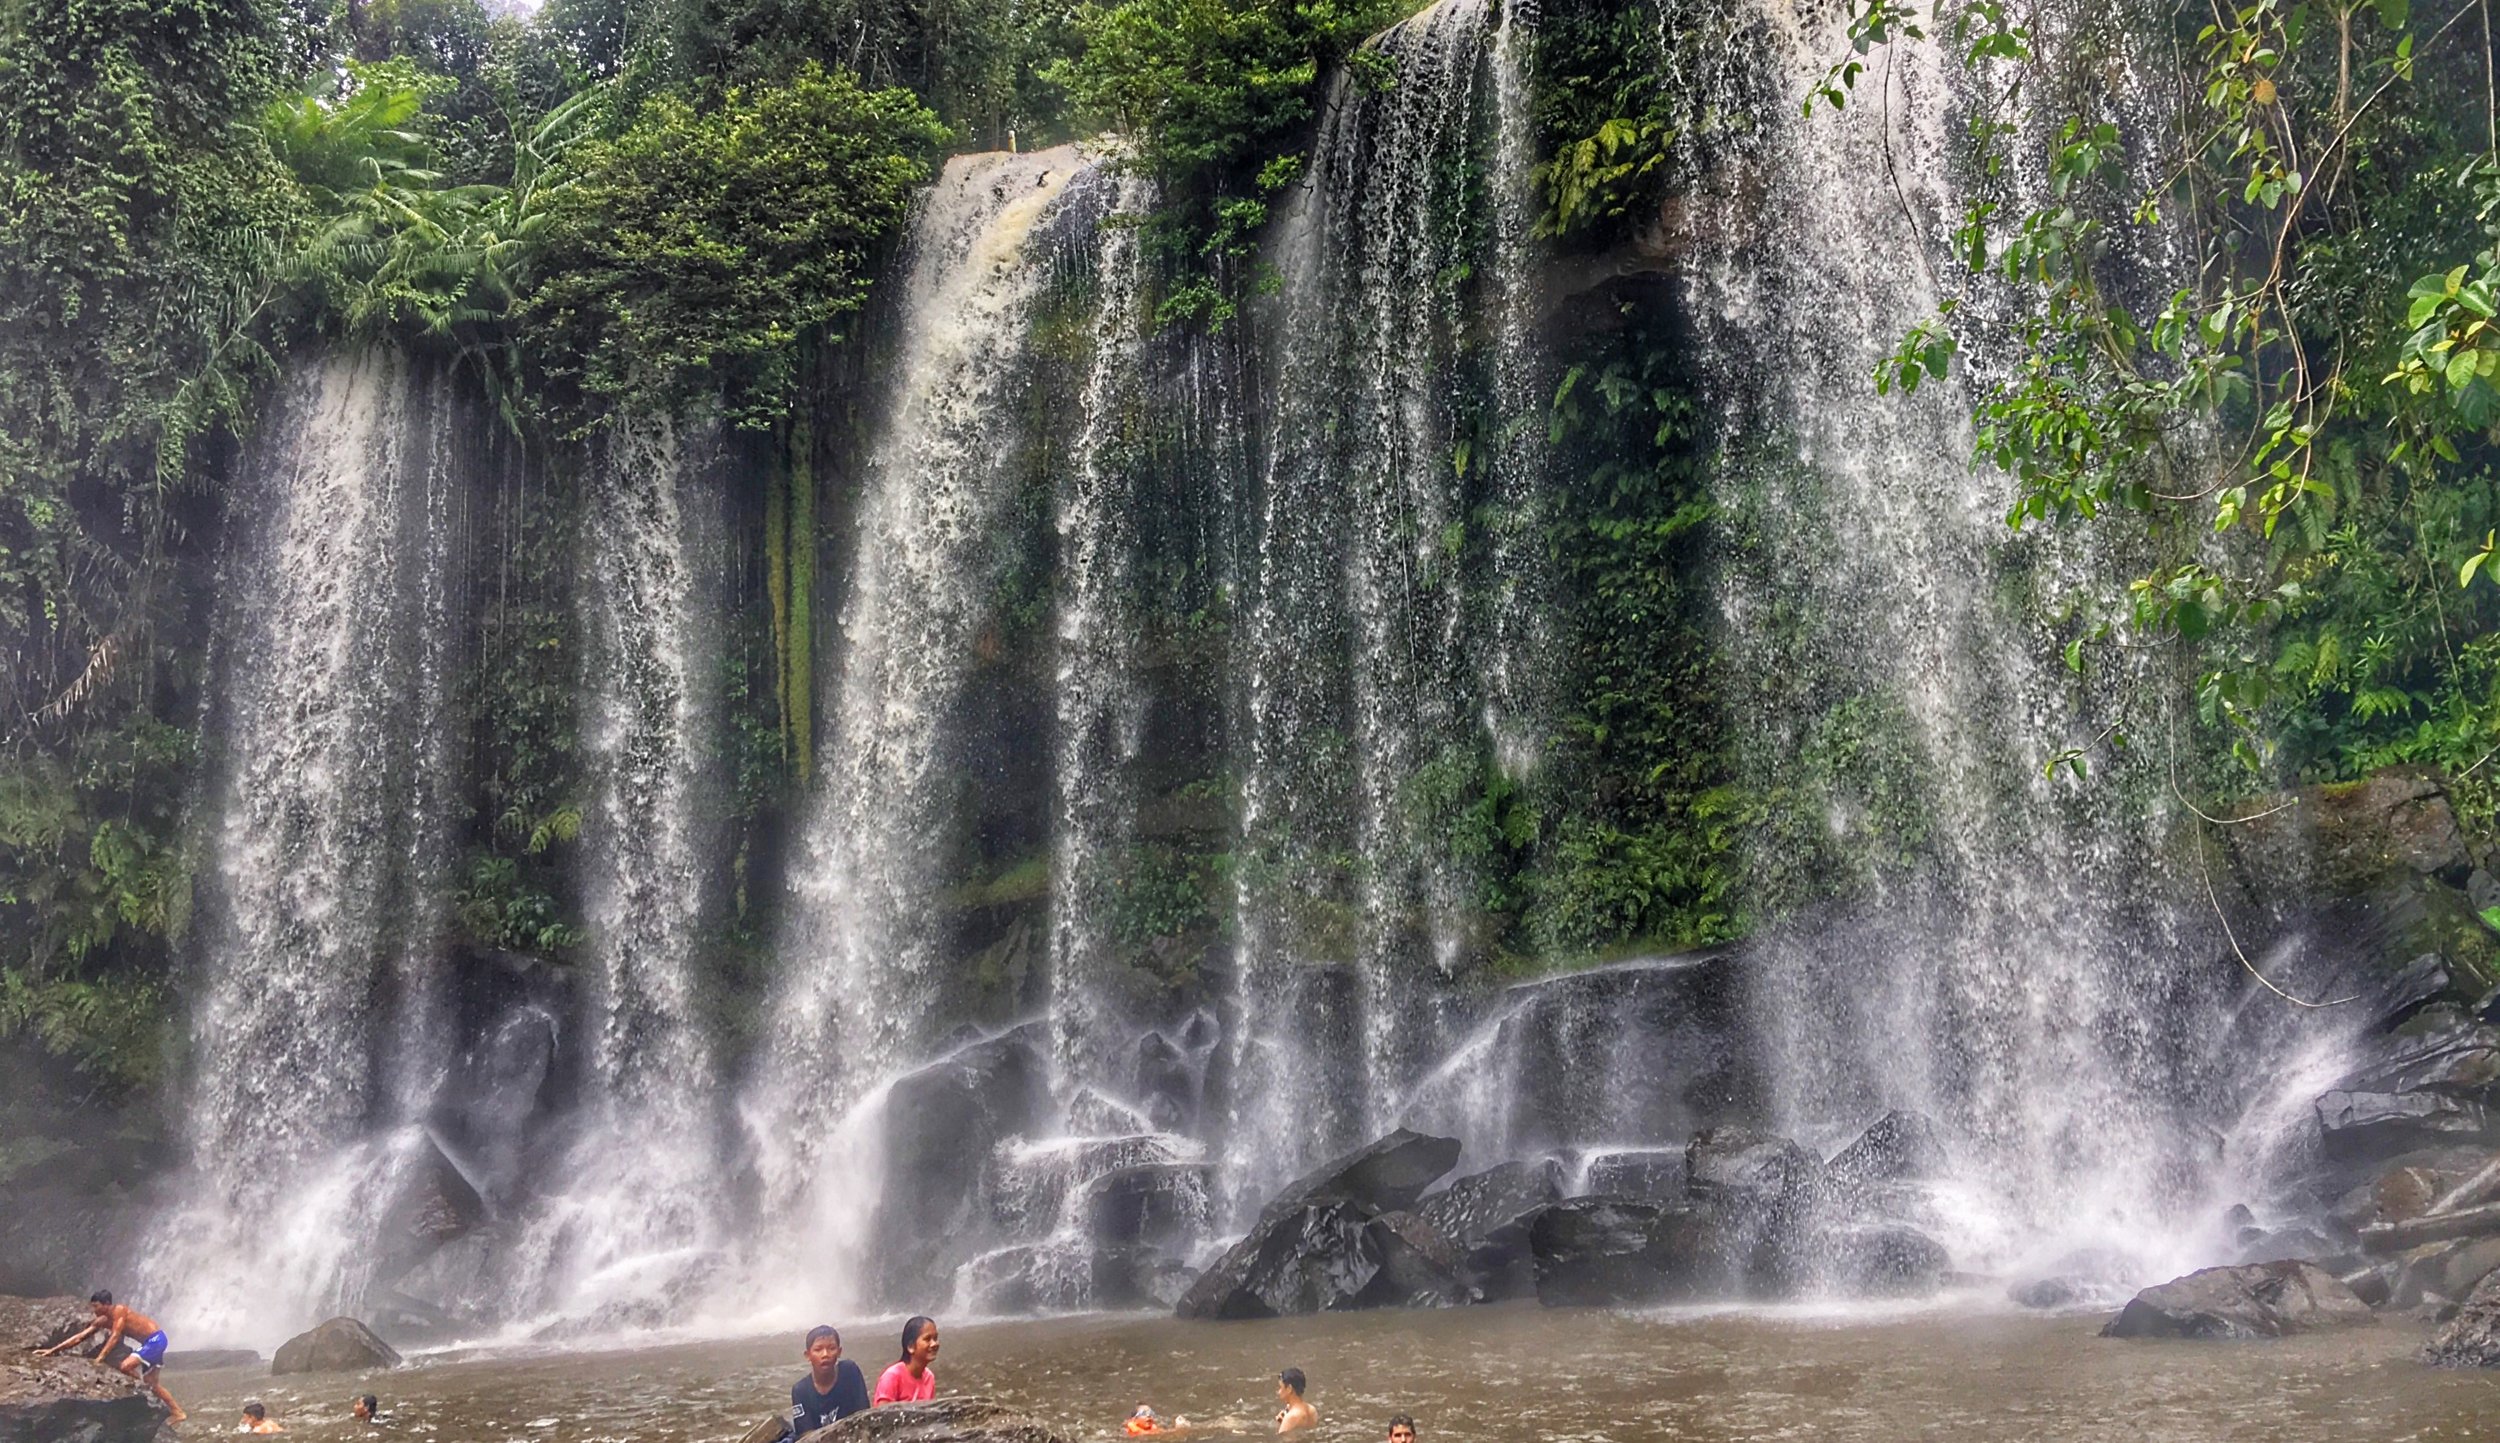  Relaxing at thousand-lingas’  waterfall    Learn more →  